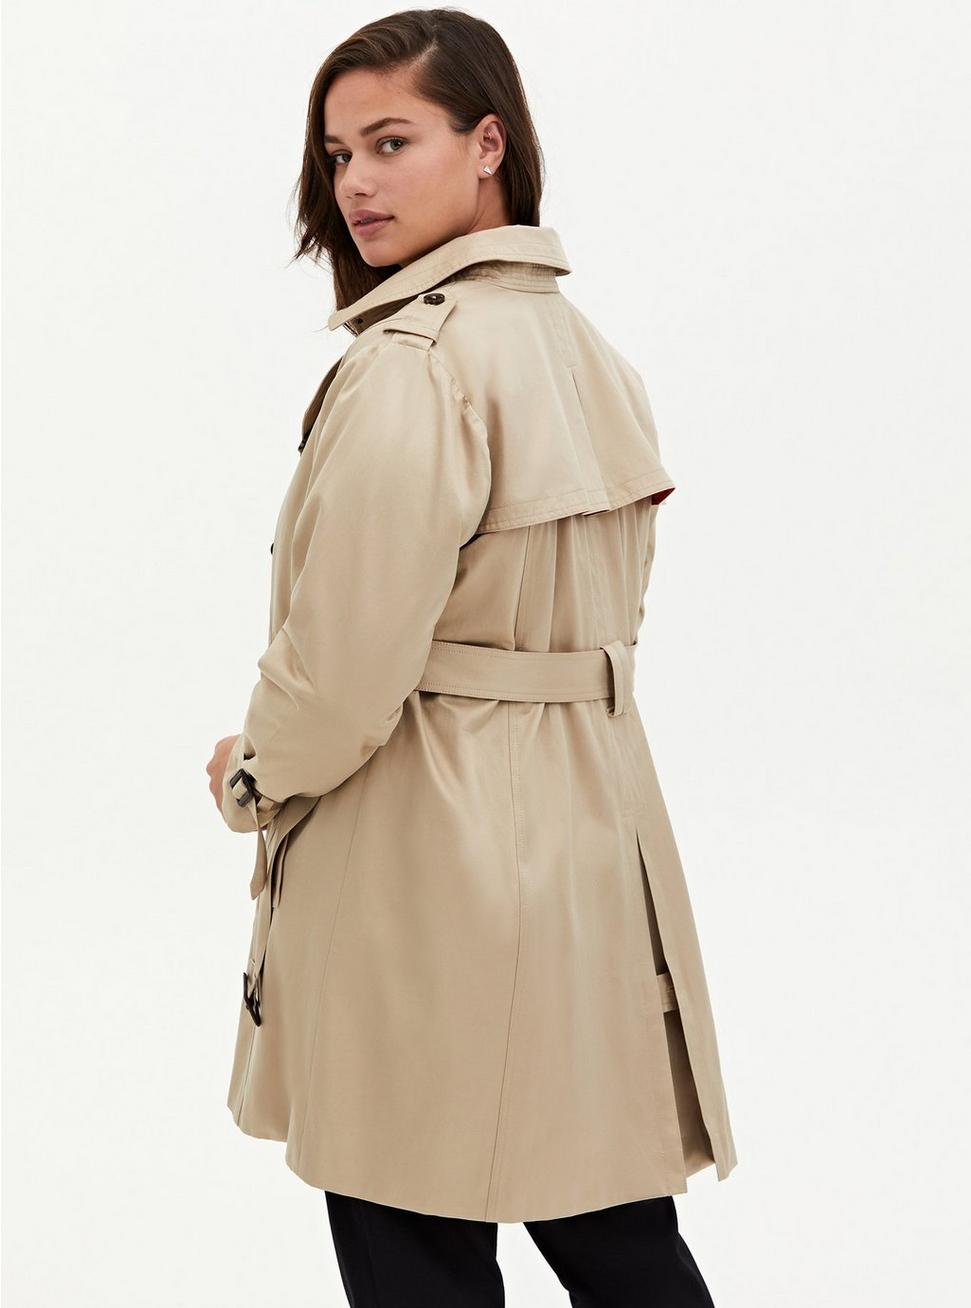 Plus Size - Beige Double-Breasted Belted Trench Coat - Torrid